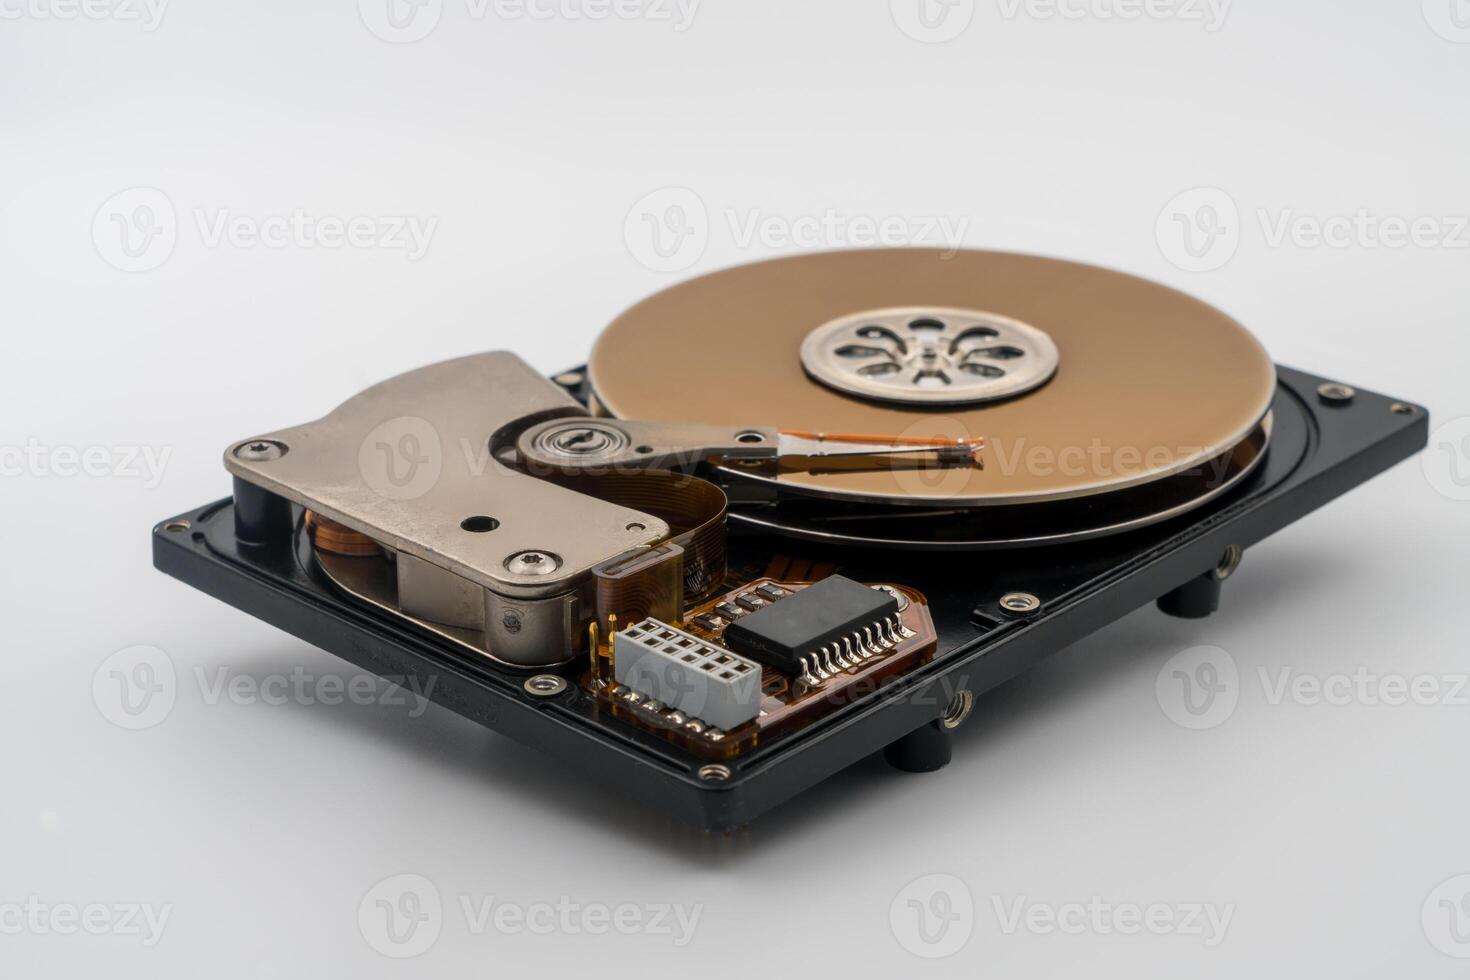 HDD, Hard disk drive, platters, circular magnetic disk. Mechanical and electronic components. Actuator arm with read write head. Central spindle. Circuit board. Precision device for data storage. photo